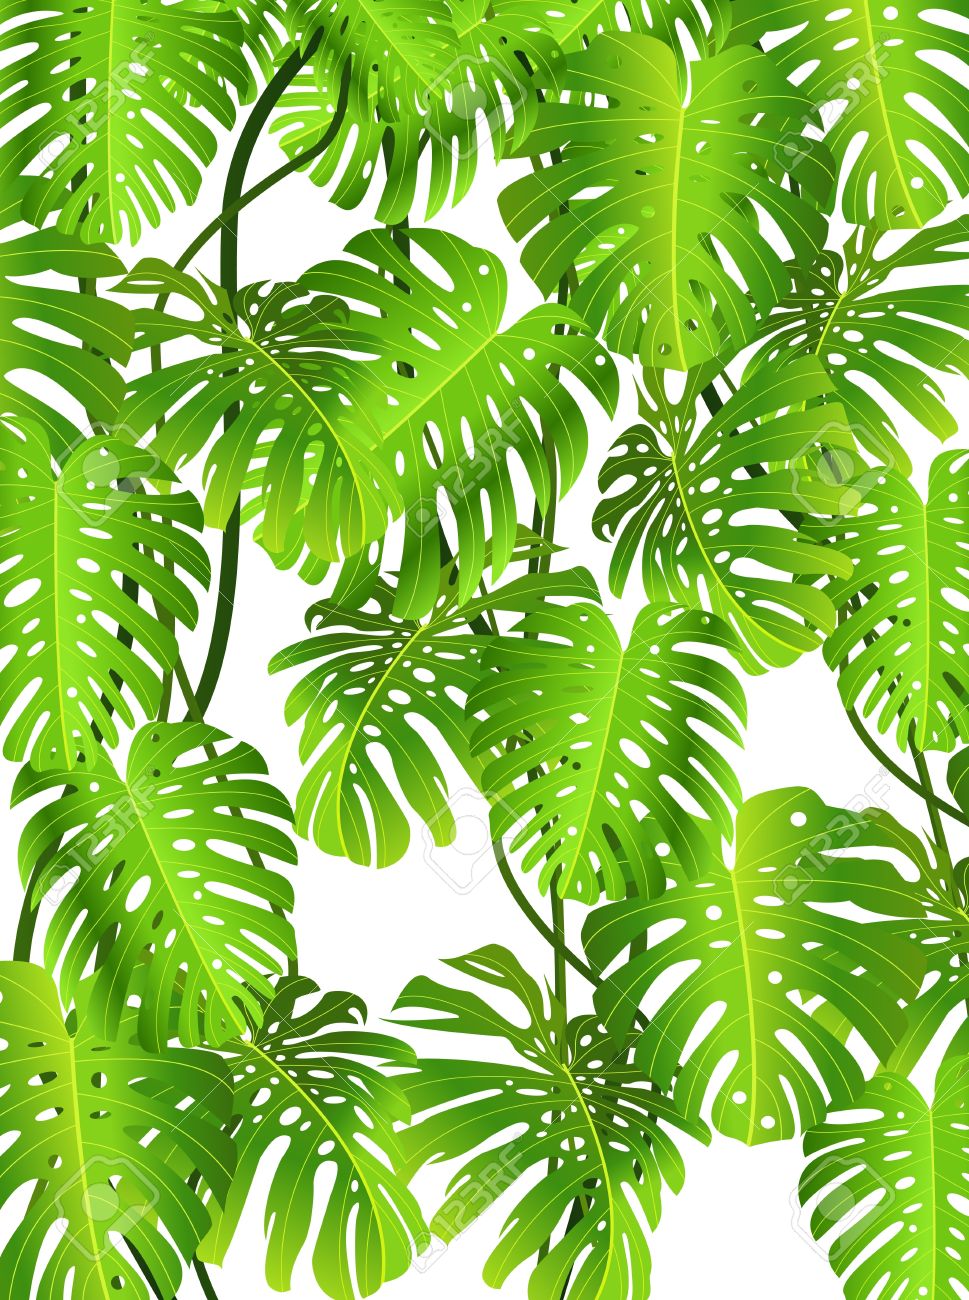 Tropical background clipart 6 » Clipart Station.